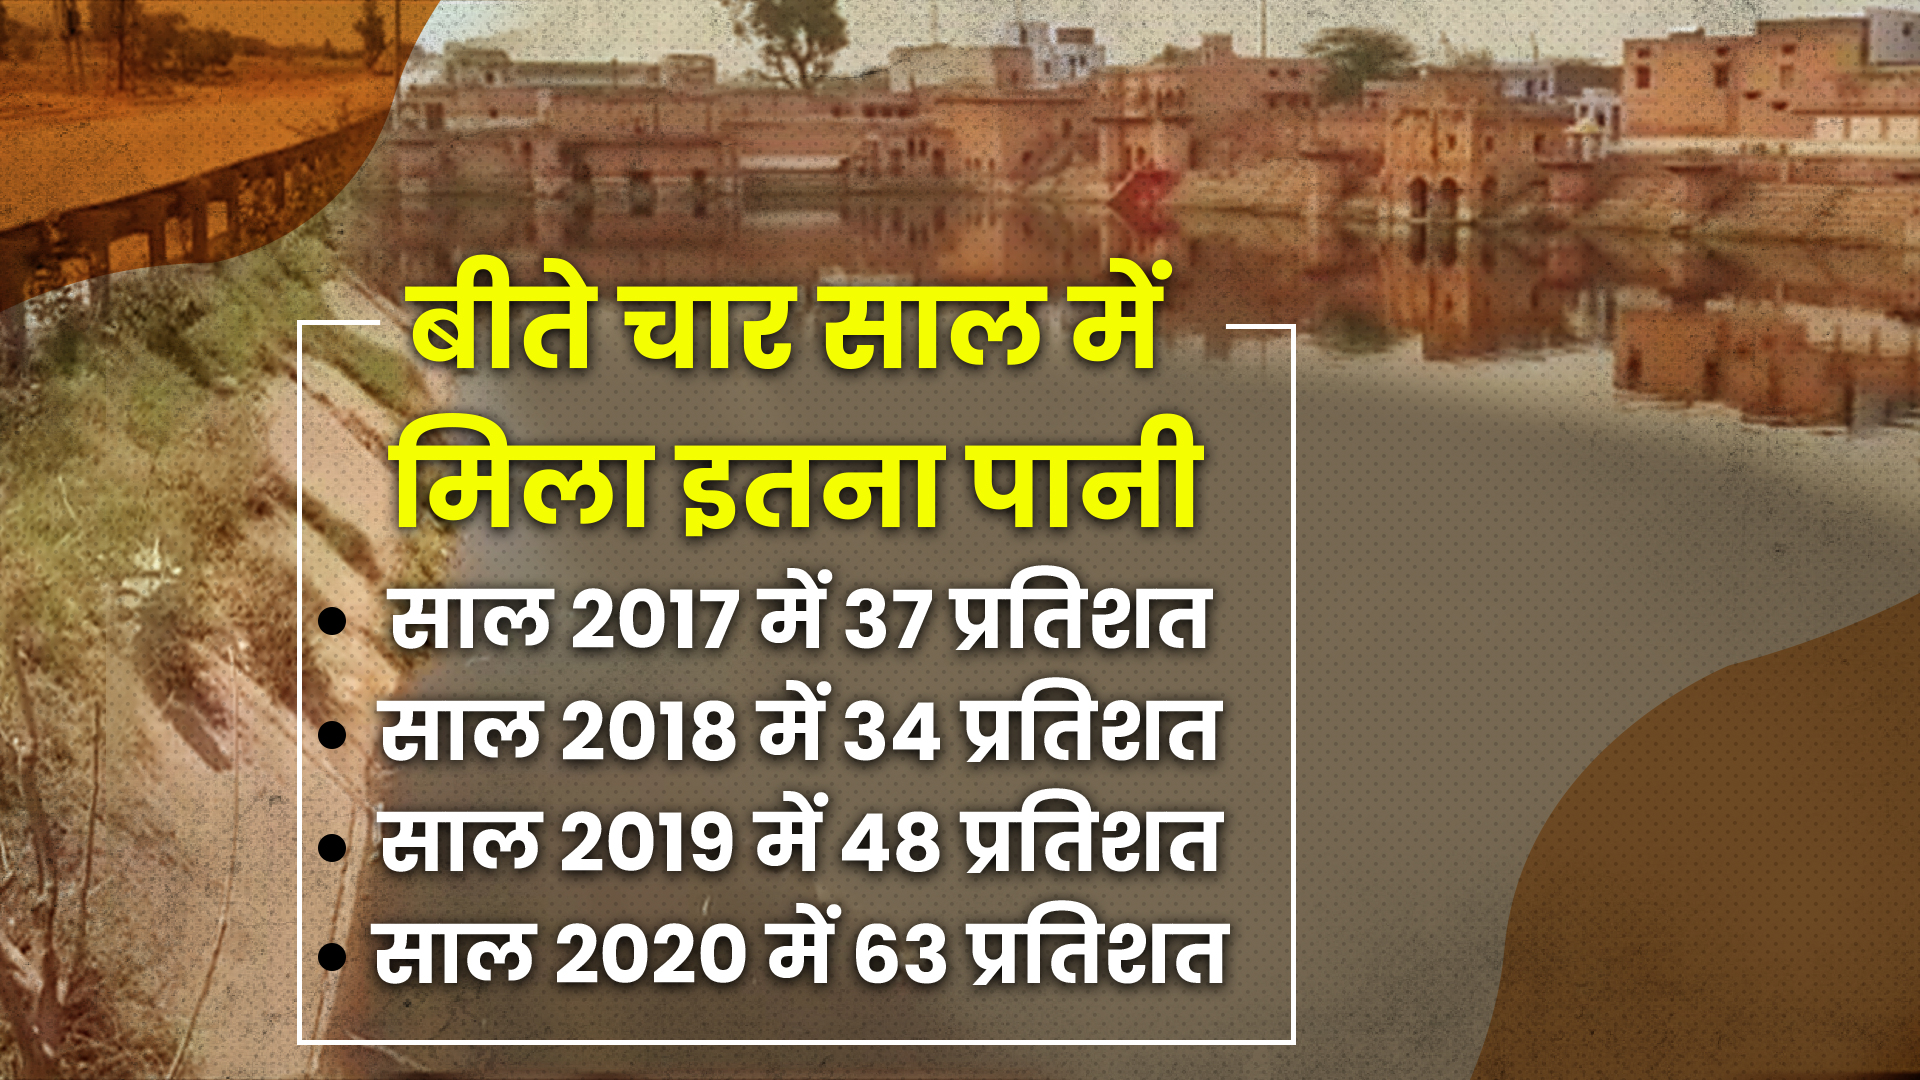 yamuna water agreement in bharatpur  yamuna water agreement news  bharatpur news  etv bharat news  water problem in rajasthan  water problem to farmers